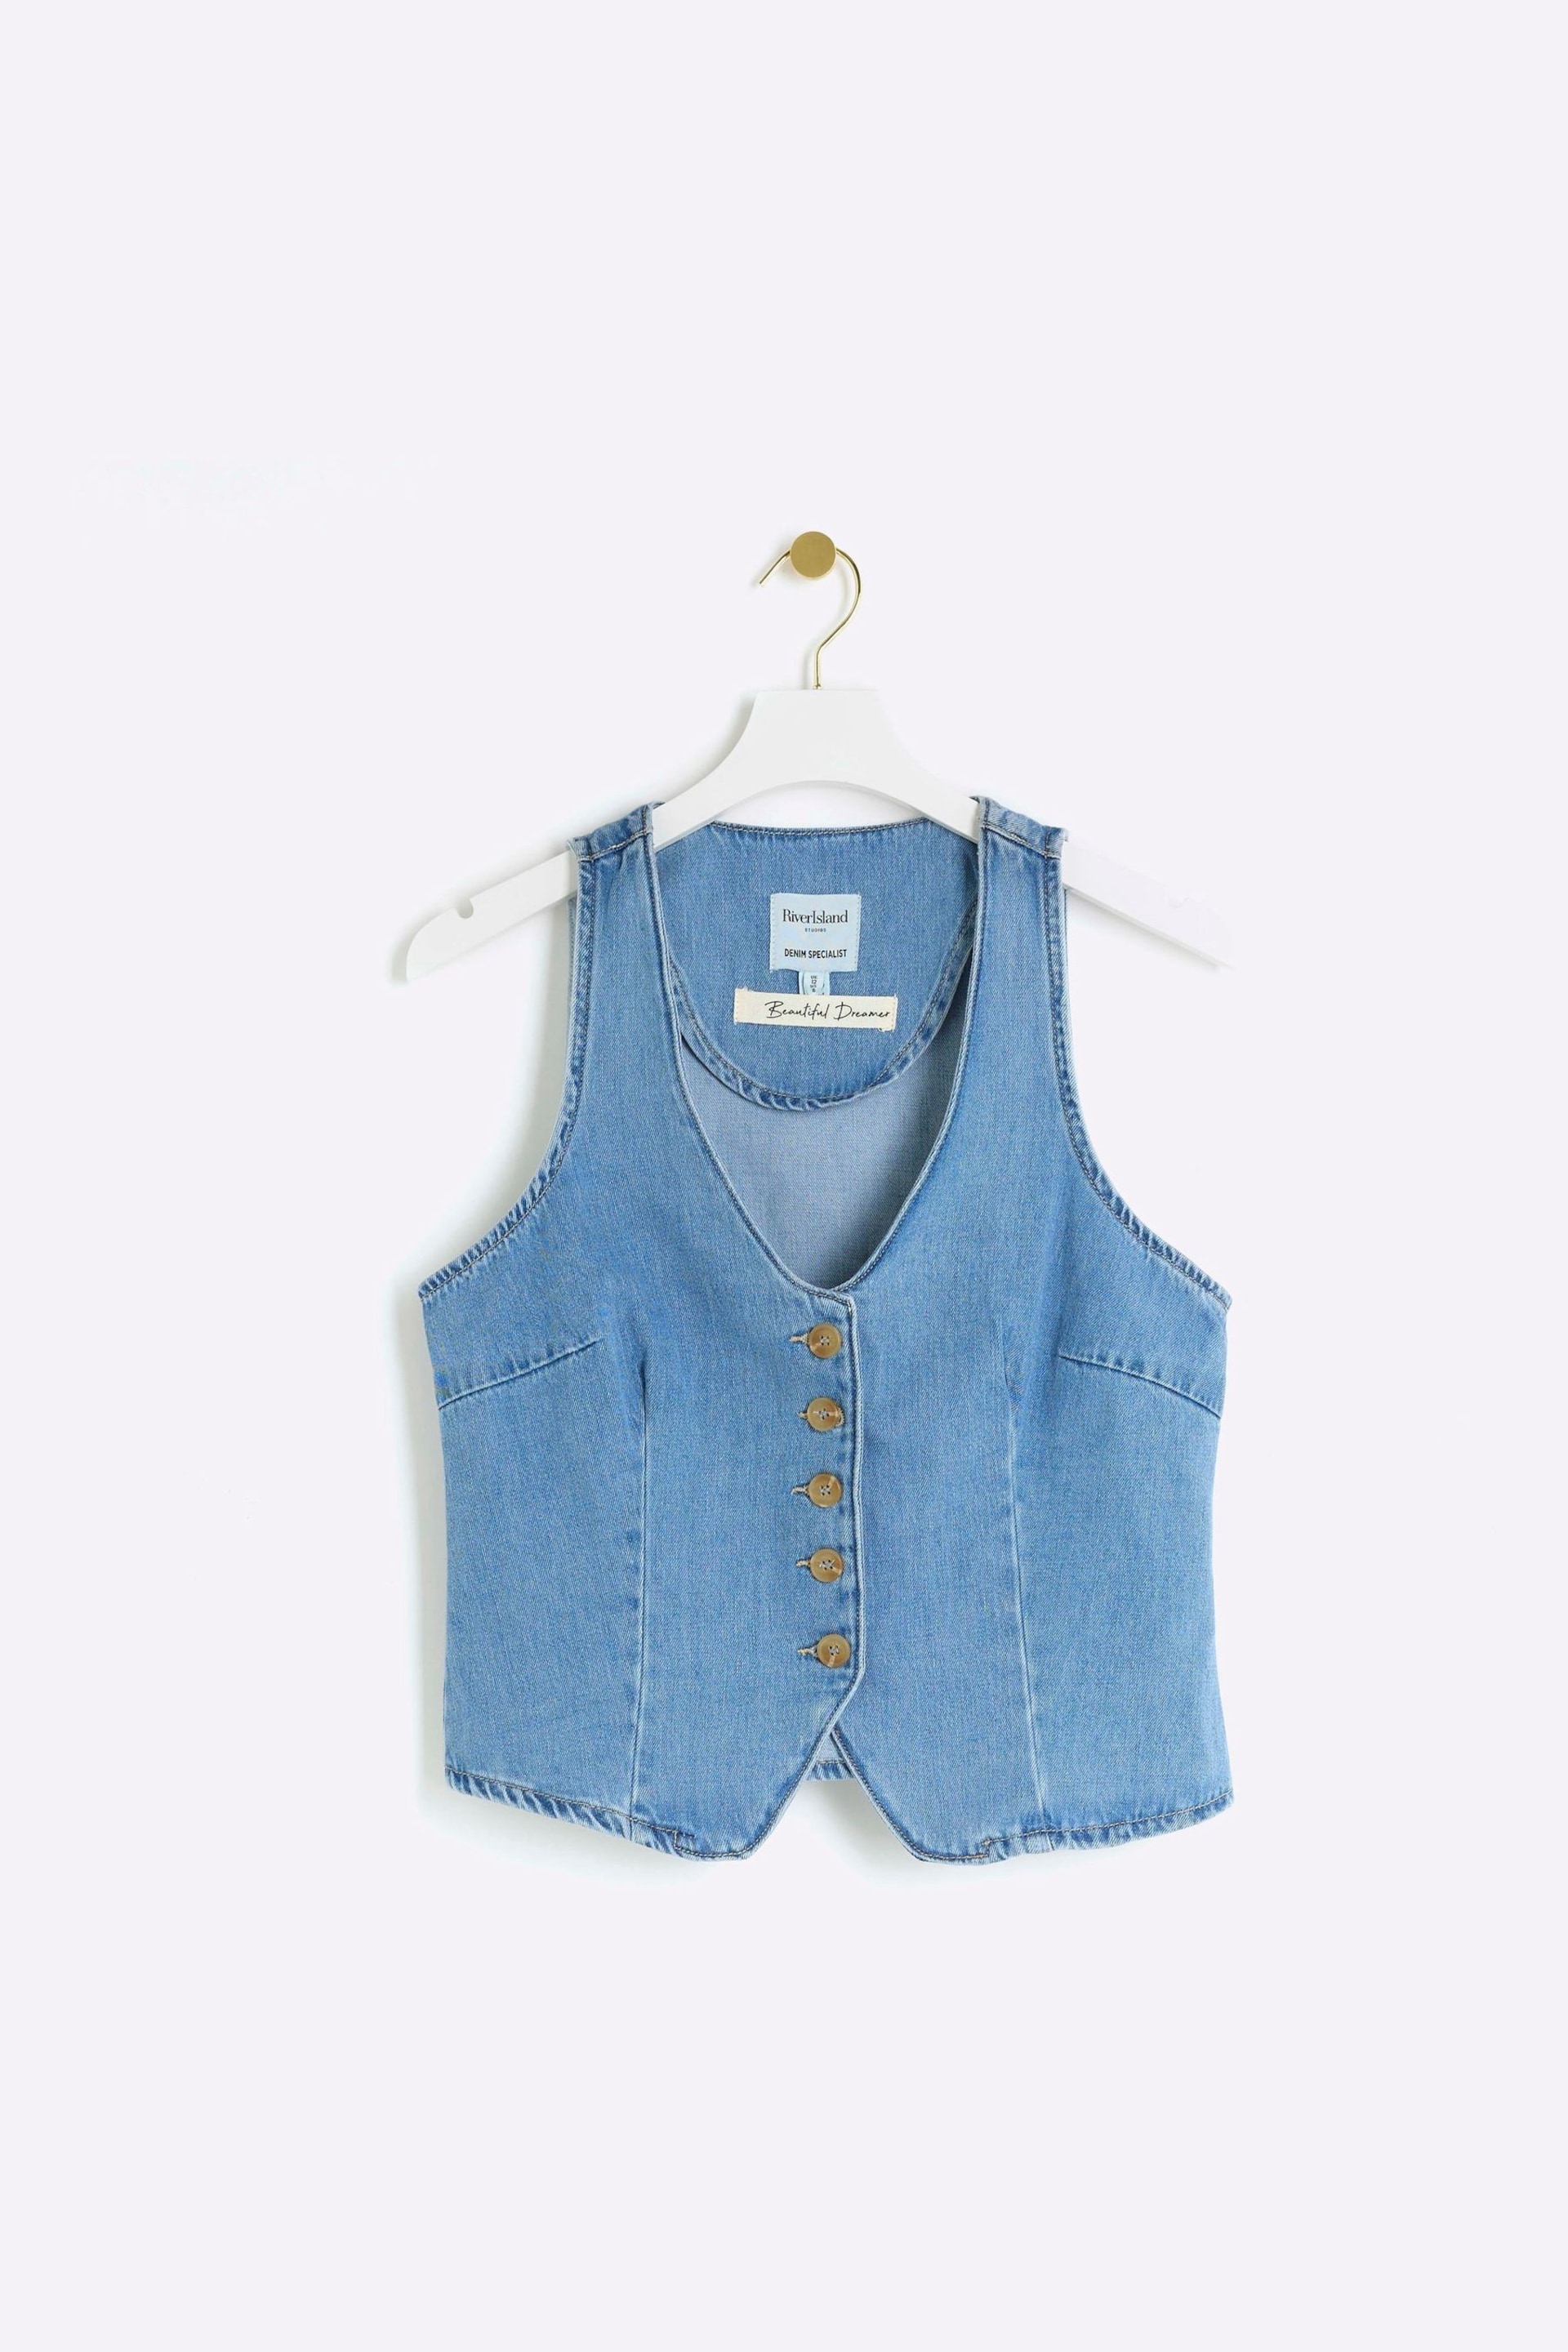 River Island Blue Denim Button Front Waistcoat - Image 4 of 5